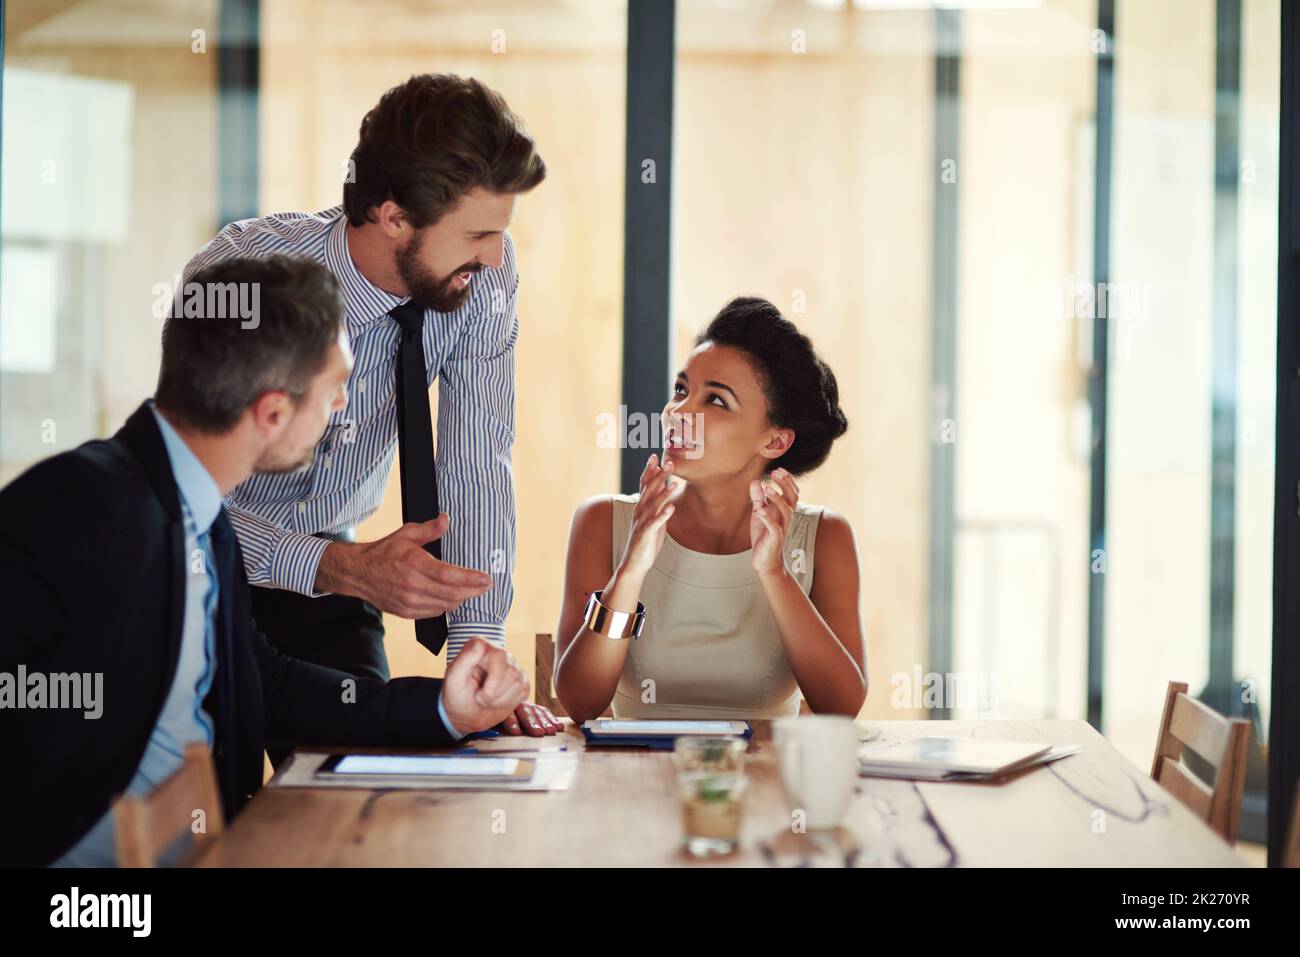 Building success as a team. Shot of a group of colleagues working together in an office. Stock Photo